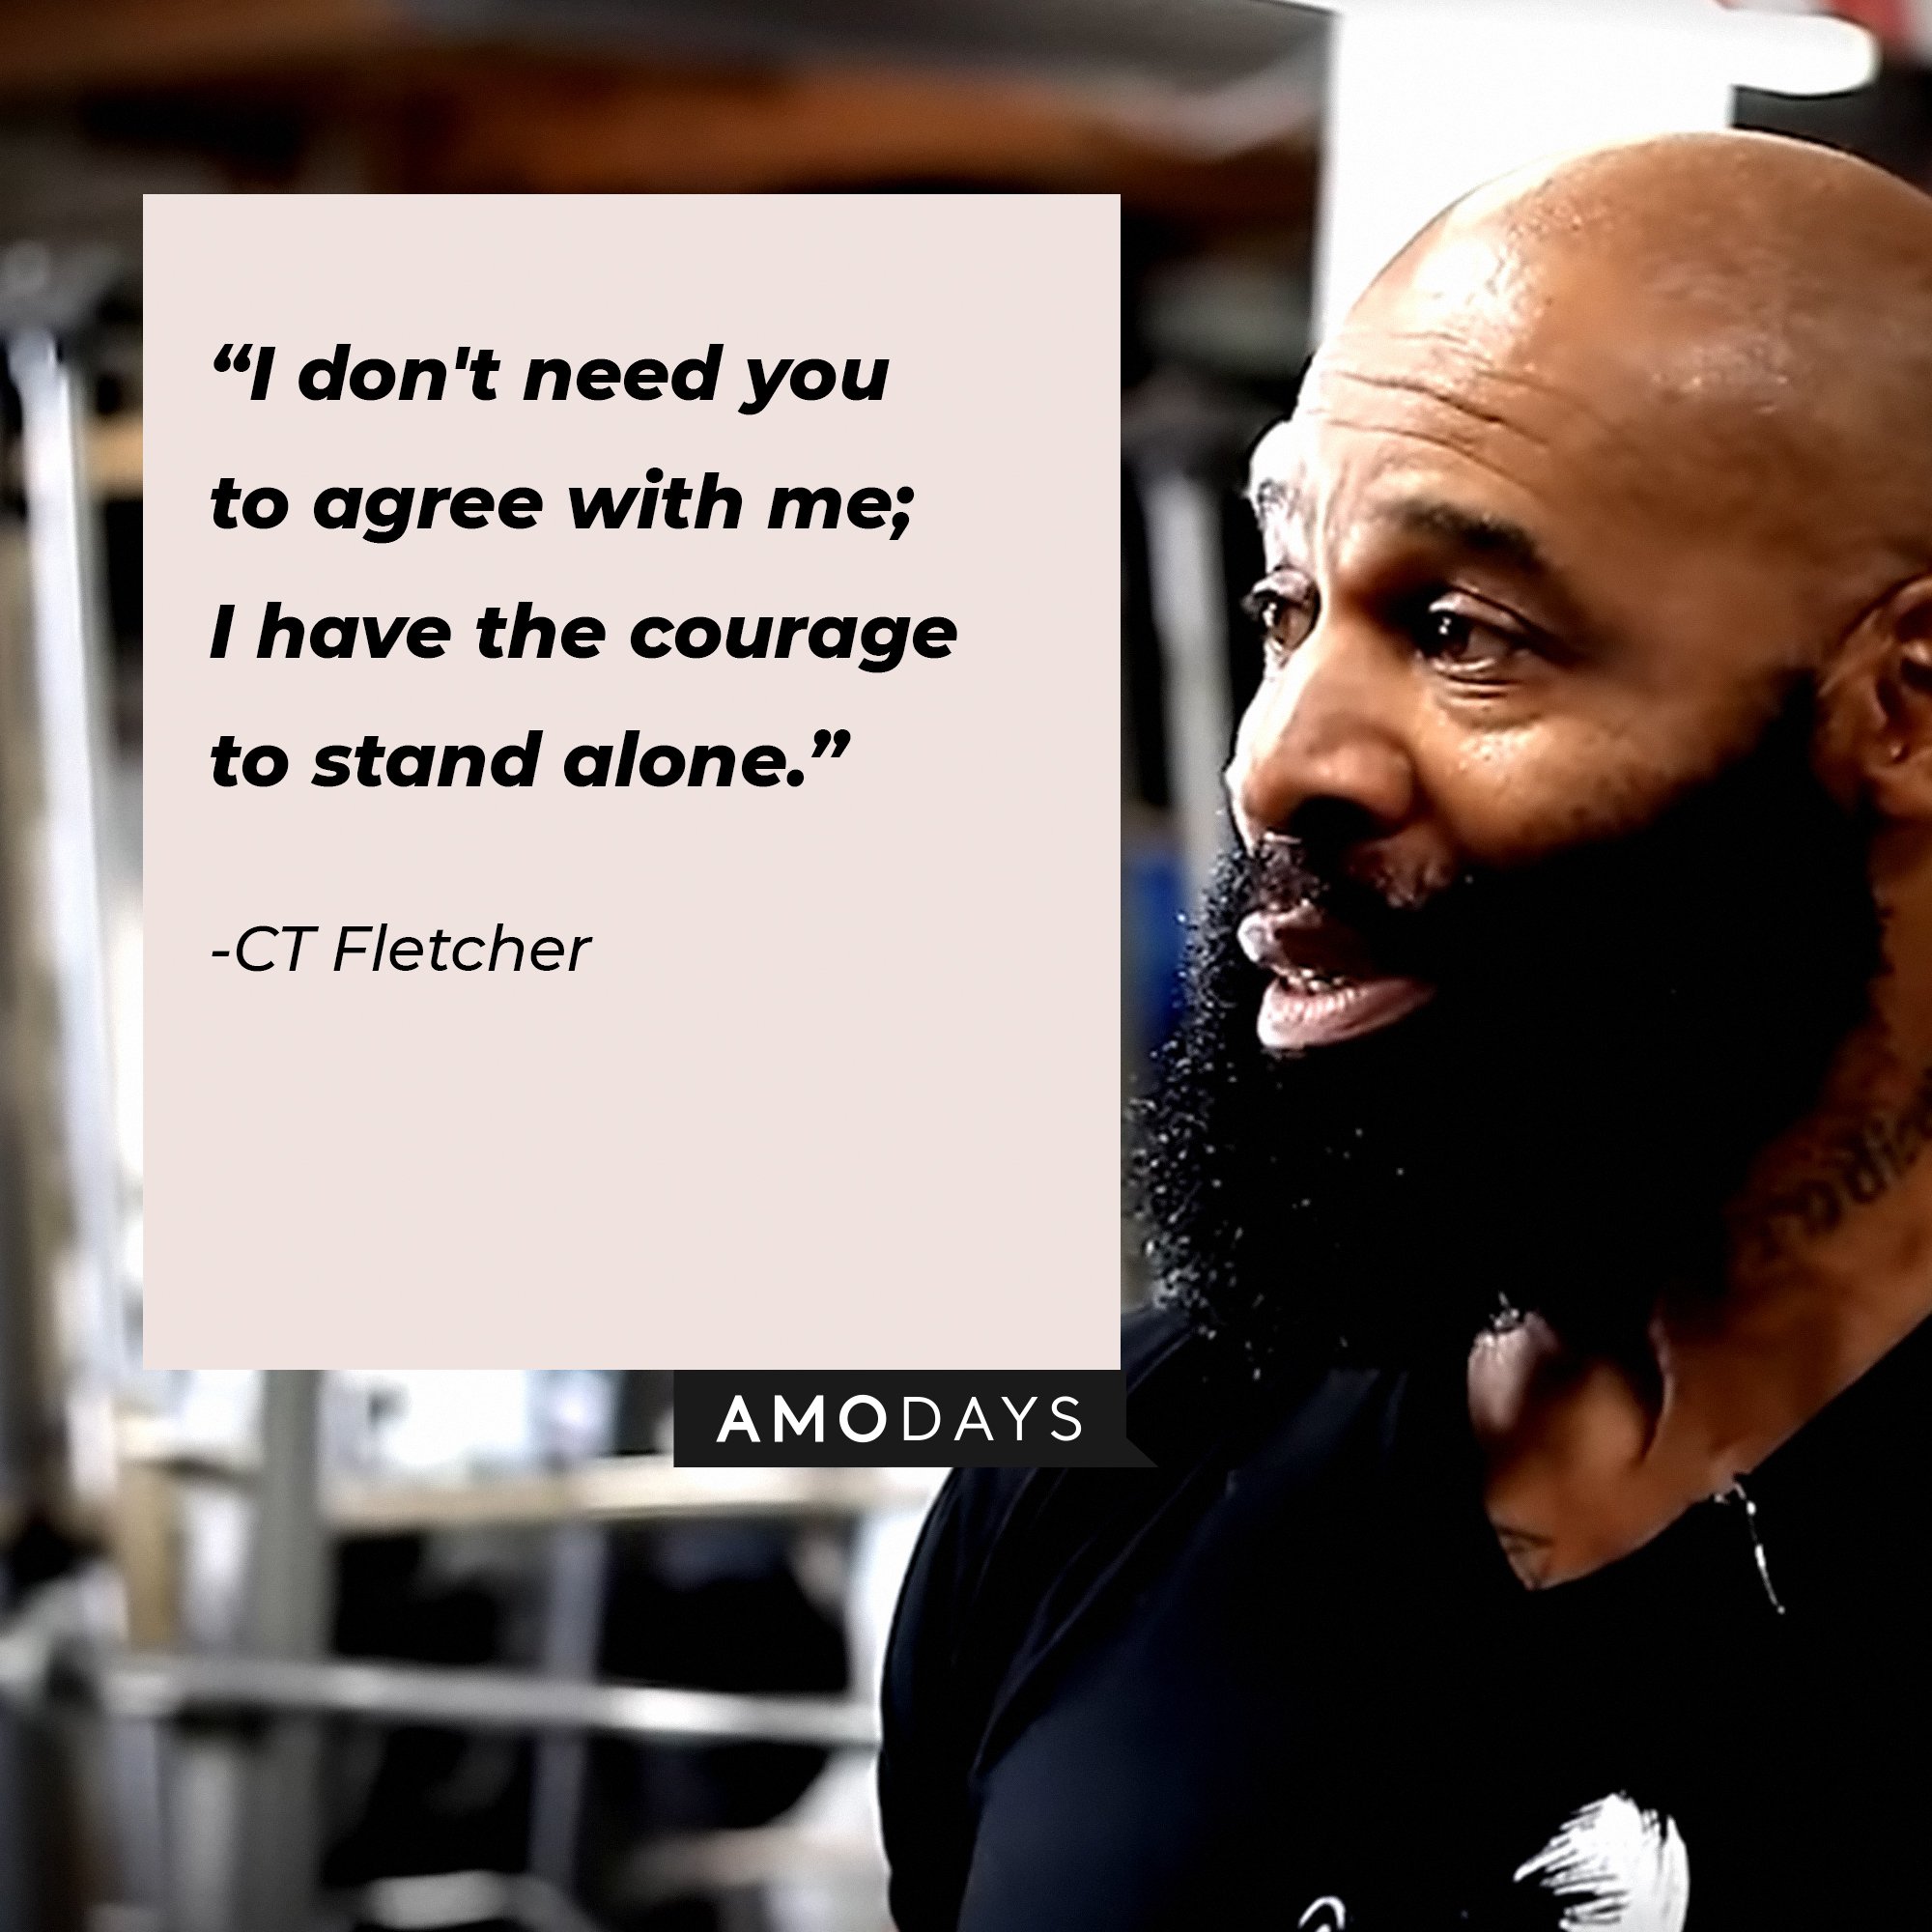 CT Fletcher's quote:\\\\\\\\u00a0"I don't need you to agree with me; I have the courage to stand alone."\\\\\\\\u00a0| Image: AmoDays